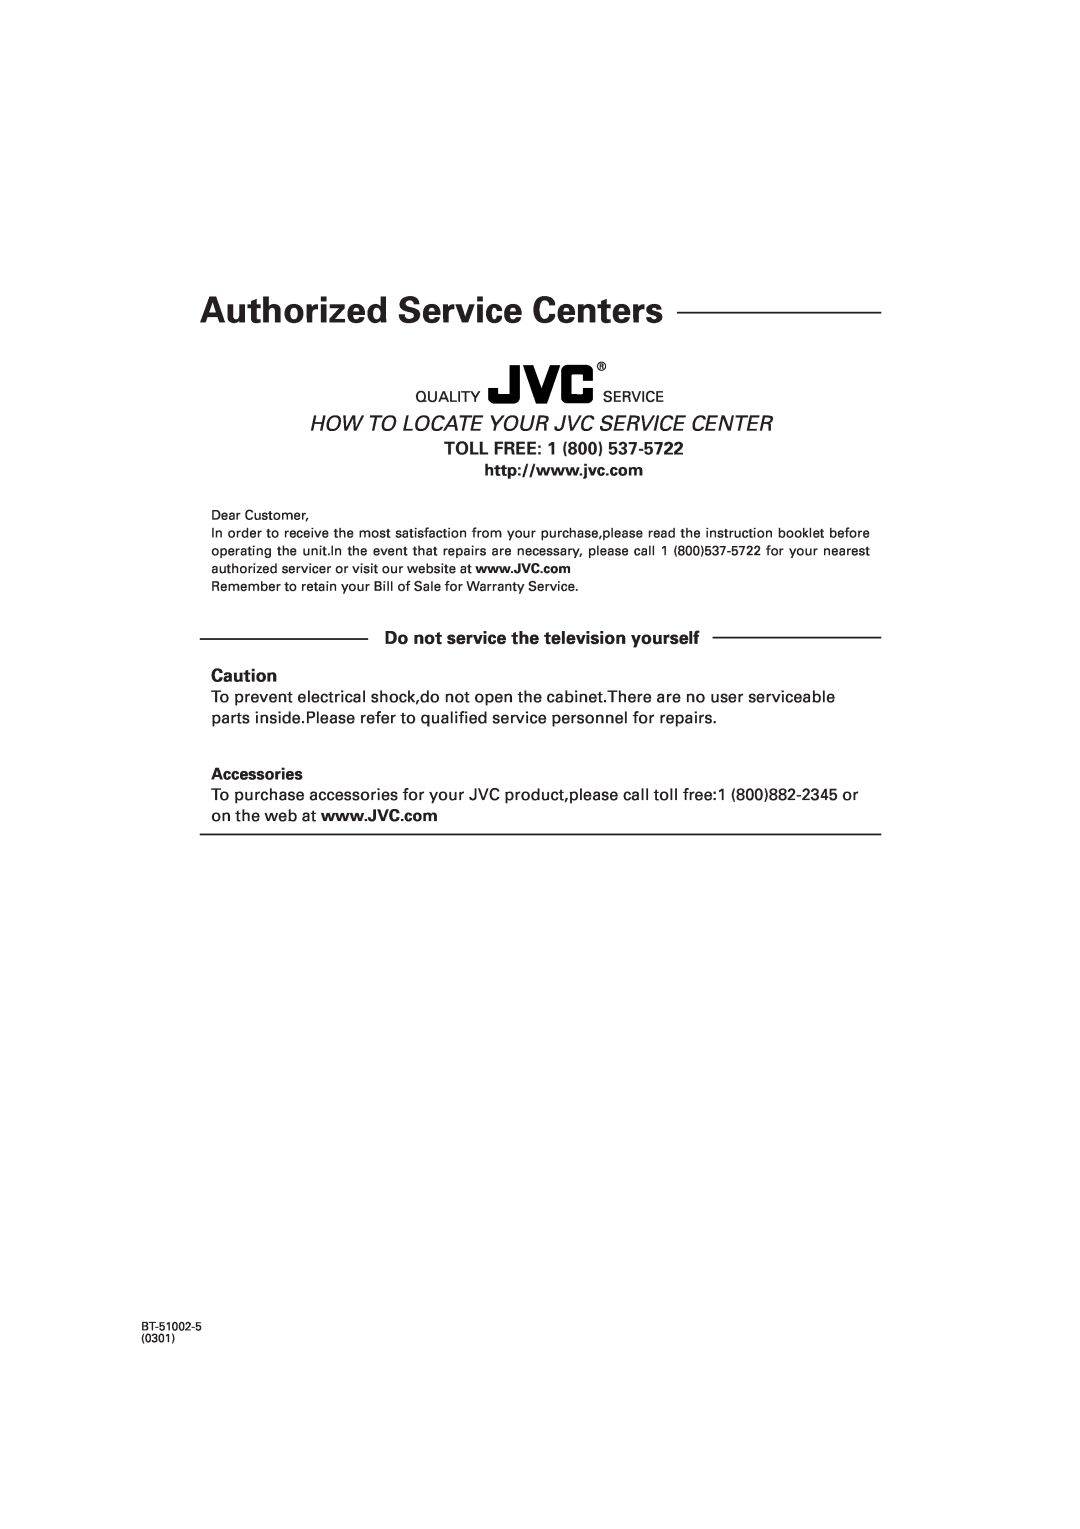 JVC RX-6020VBK manual Toll Free, Do not service the television yourself, Accessories, Authorized Service Centers 